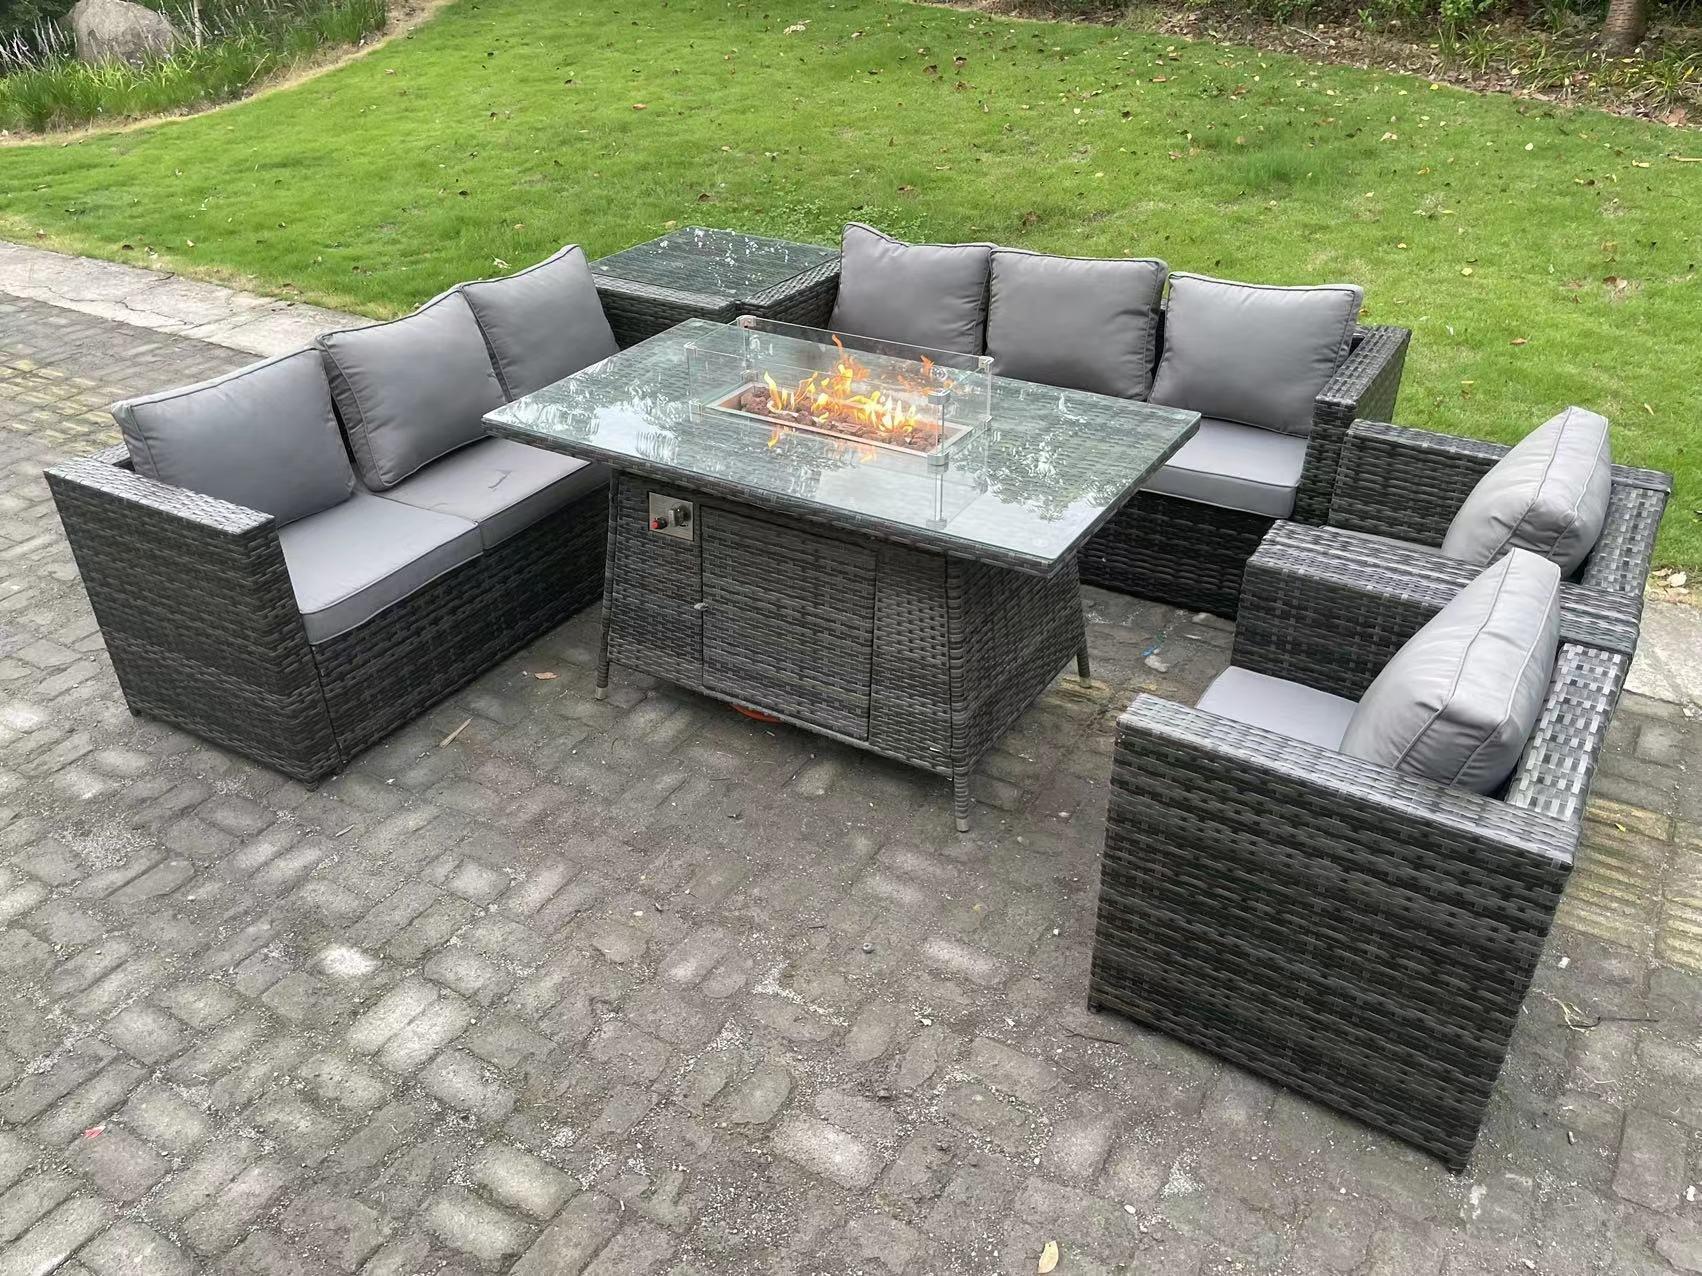 8 Seater Outdoor Rattan Gas Fire Pit Table Sets Heater Lounge Chairs